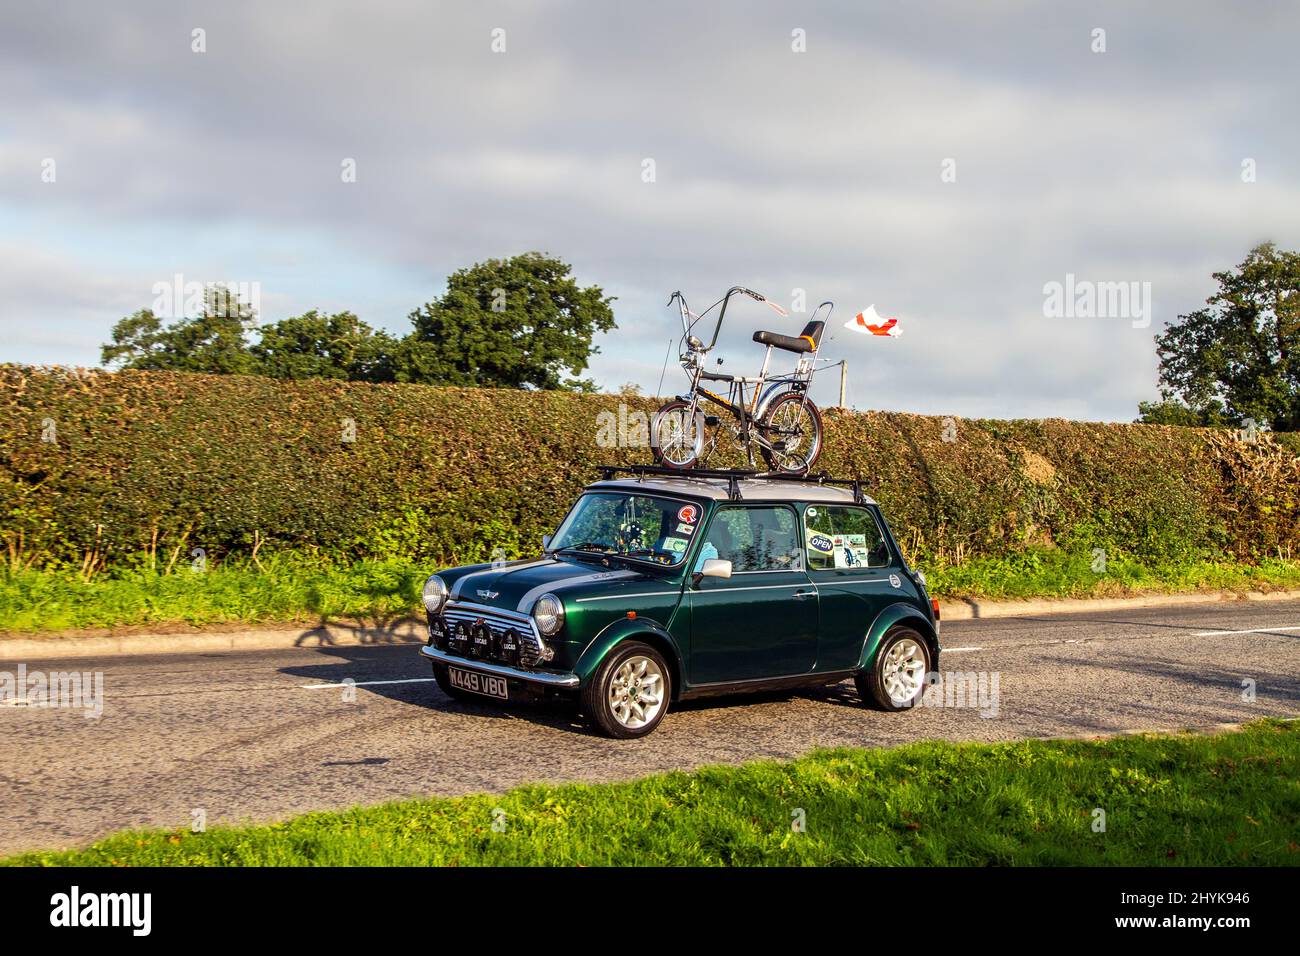 2000 green Rover Mini Cooper Sport with Chopper bicycle on roof rack flying Union Jack Flag; en-route to Capesthorne Hall classic August car show, Cheshire, UK Stock Photo